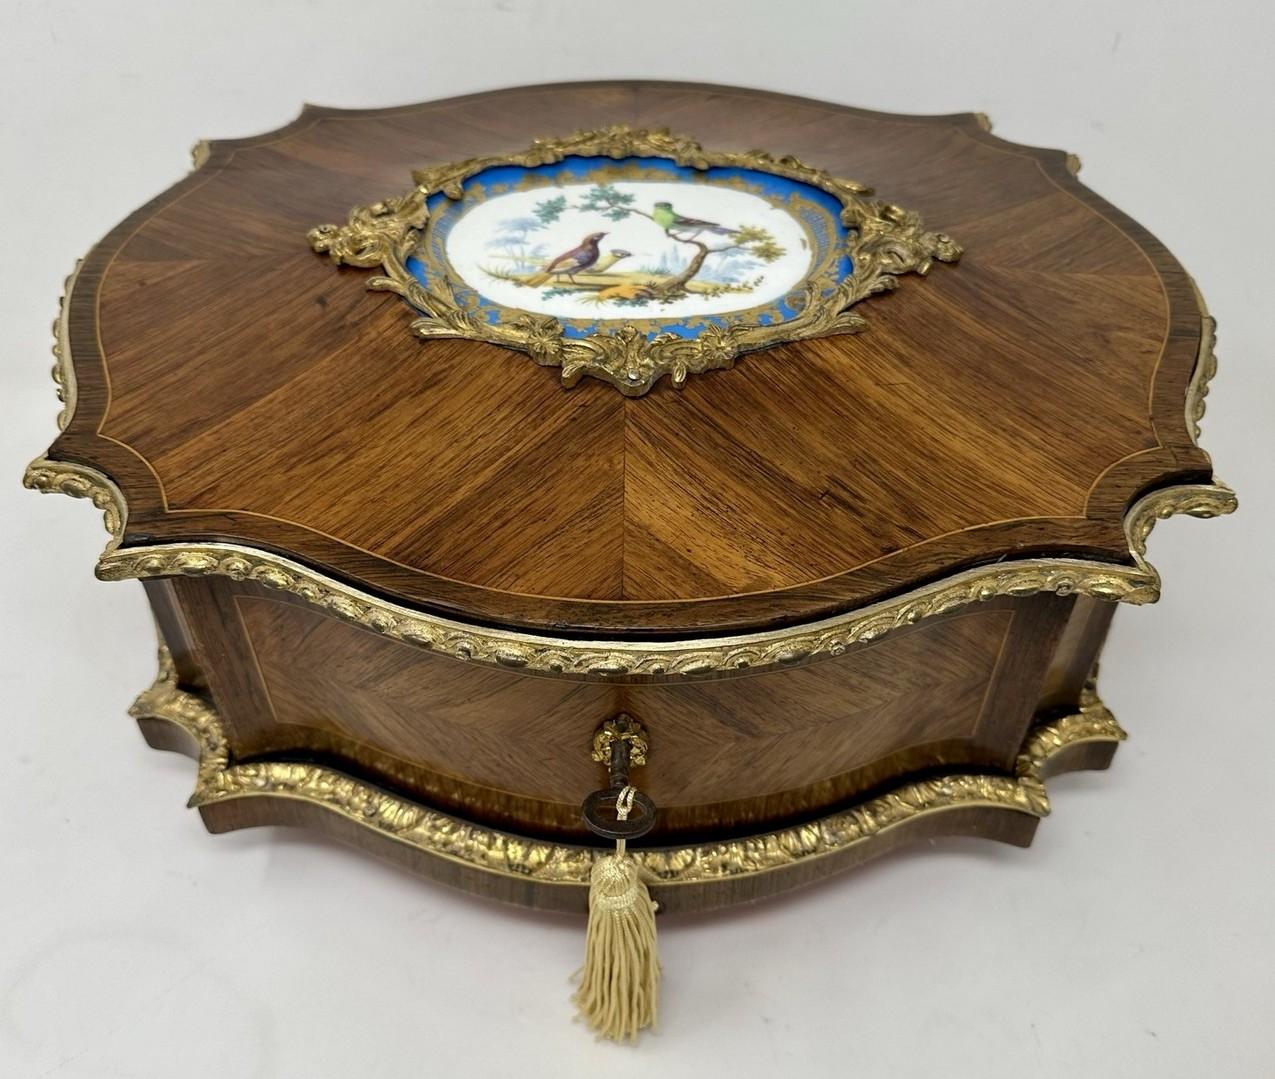 An Exceptionally Fine Example of a French Ormolu Mounted Well Grained Kingwood Jewellery Casket or Table Box of large proportions made in France and firmly attributed to renowned furniture makers Vervelle Audot. Third quarter of the Nineteenth